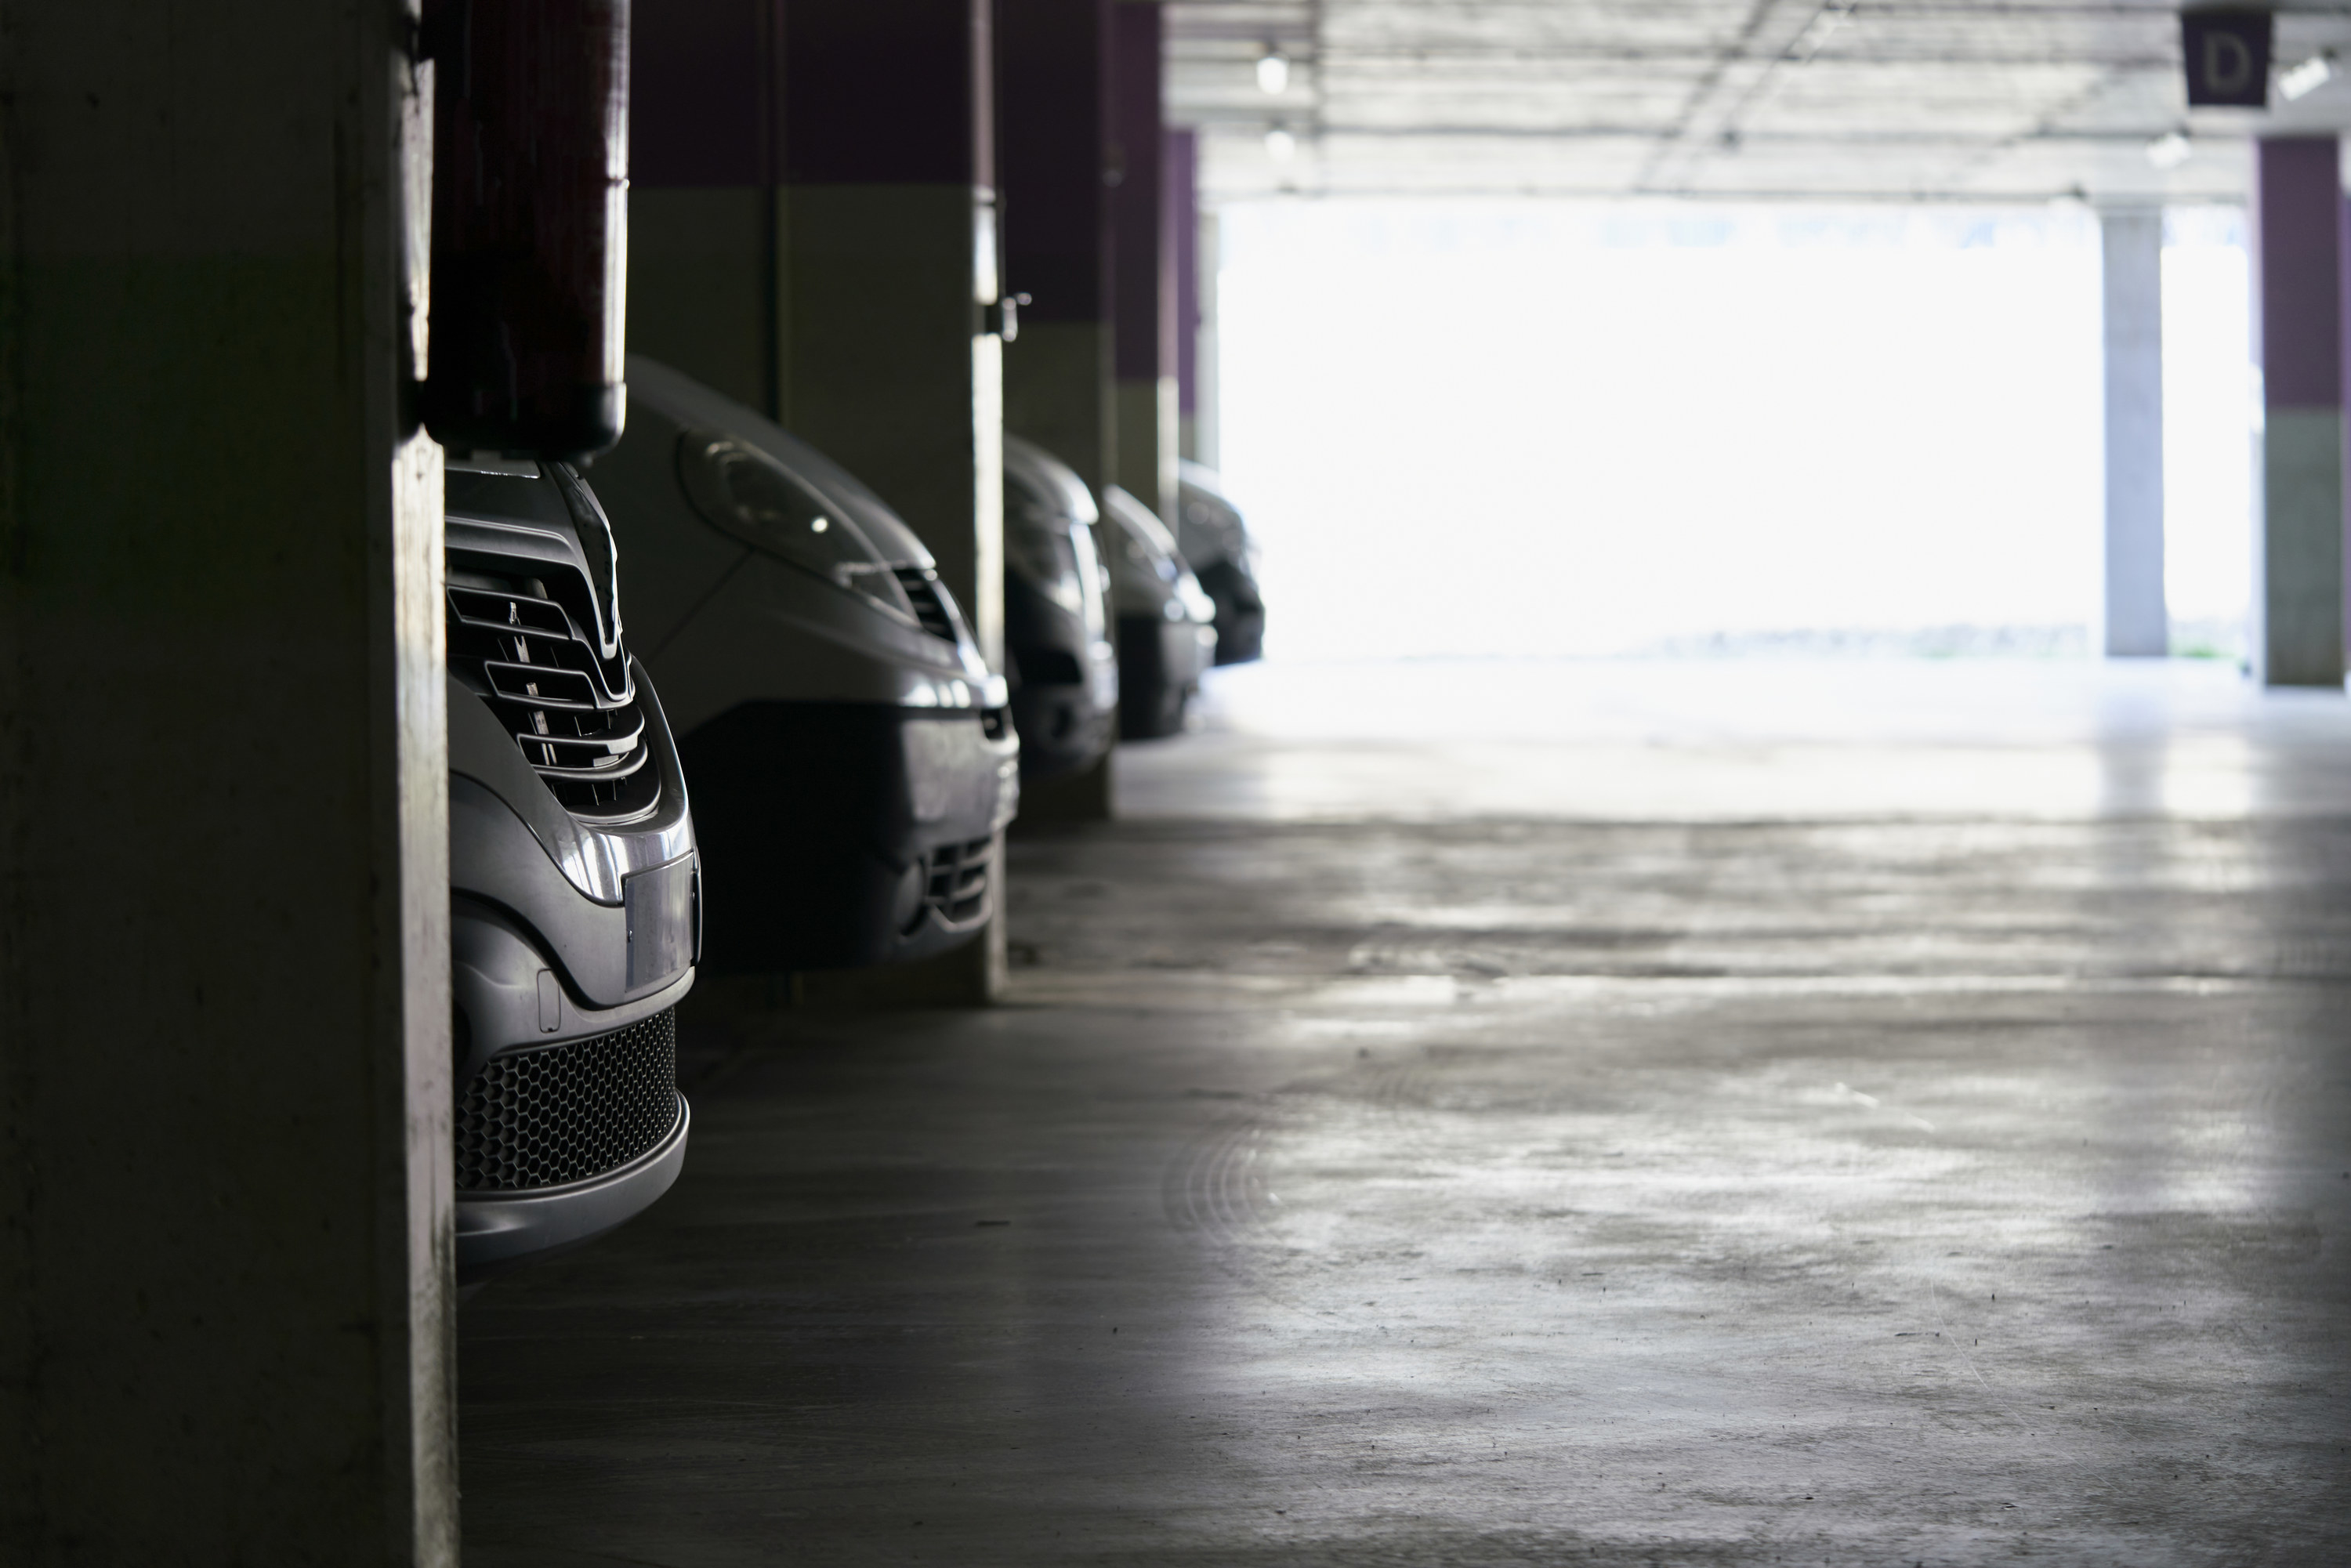 parked cars in a garage